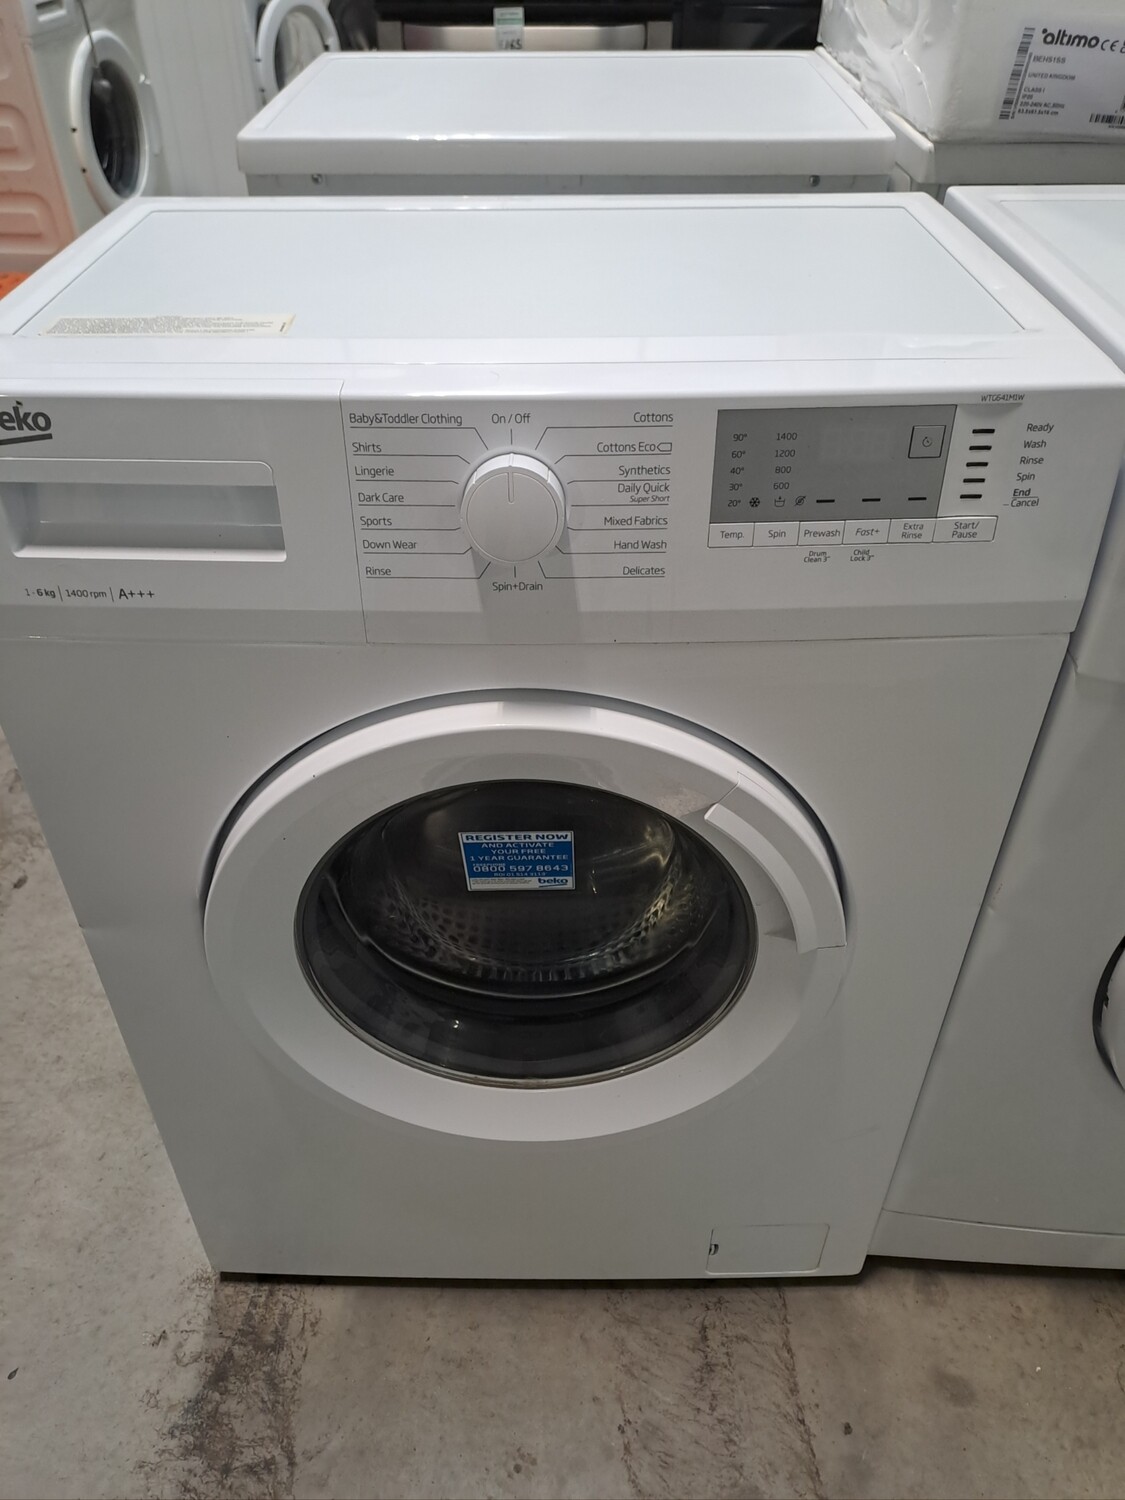 Beko WTG641M1W A+++ 6kg 1400 Spin Washing Machine - White - Refurbished - 6 Month Guarantee. This item is located in our Whitby Road Shop 